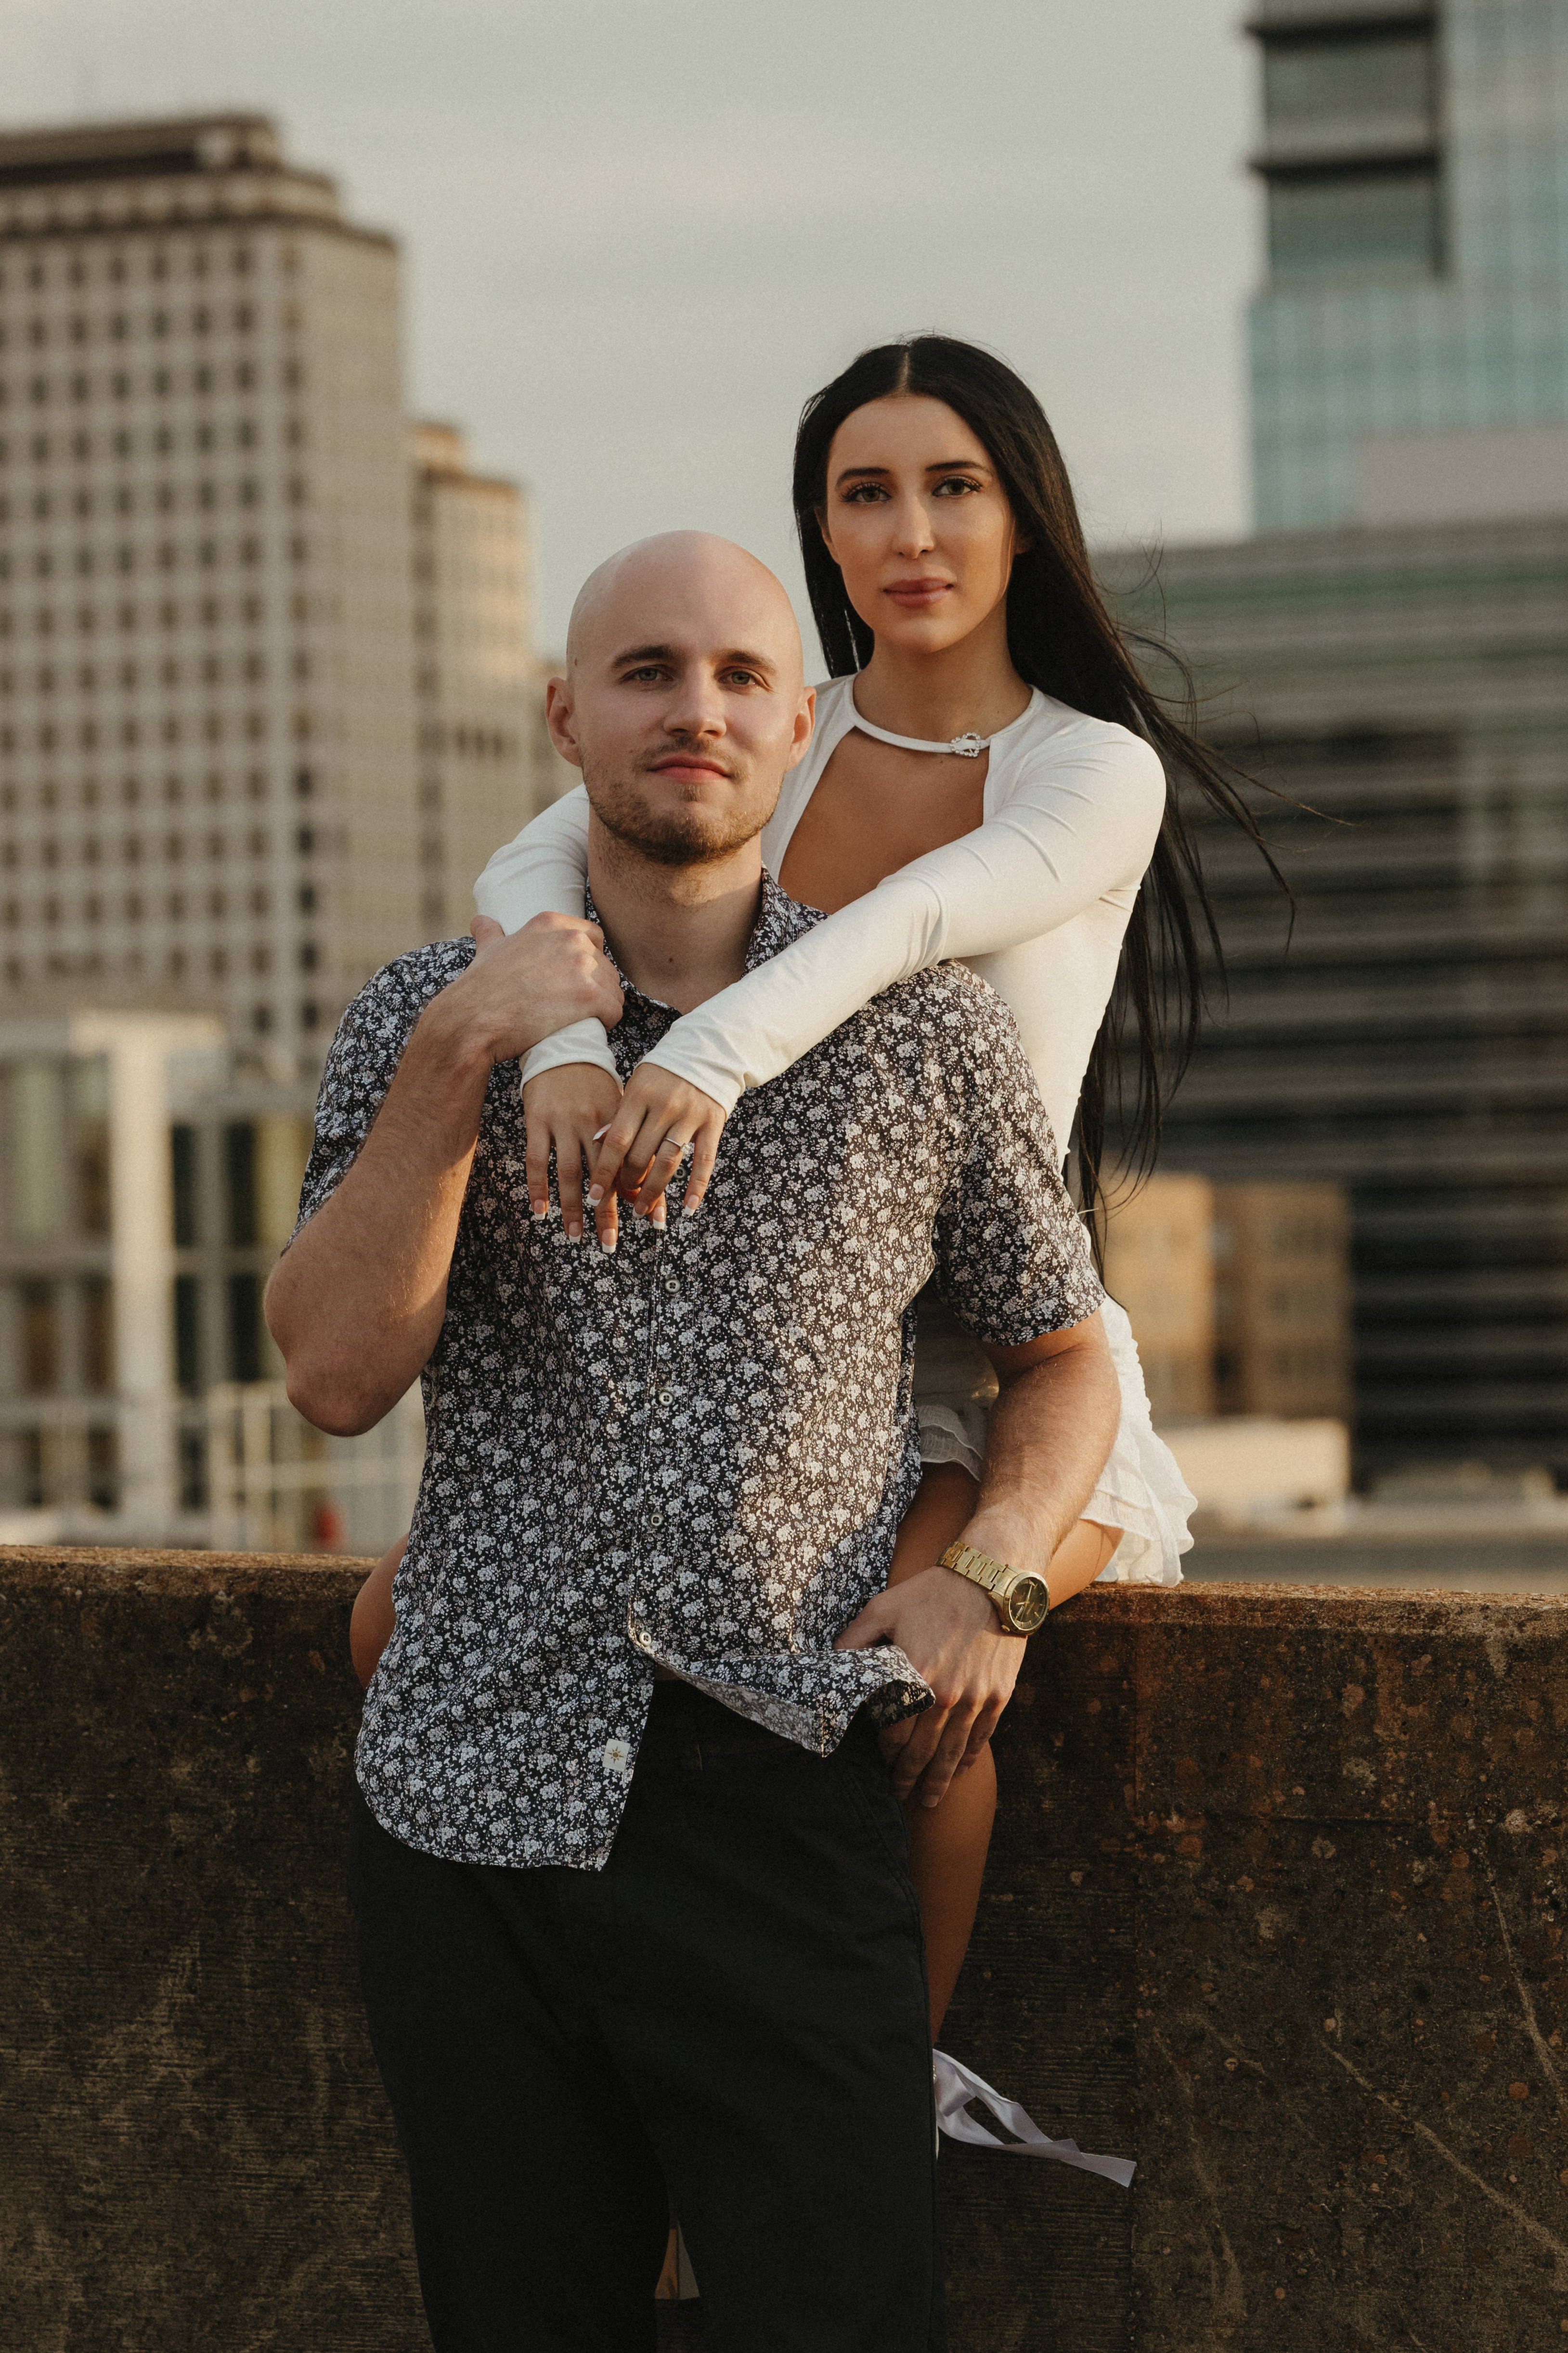 Downtown Austin Texas Rooftop Engagement Photoshoot